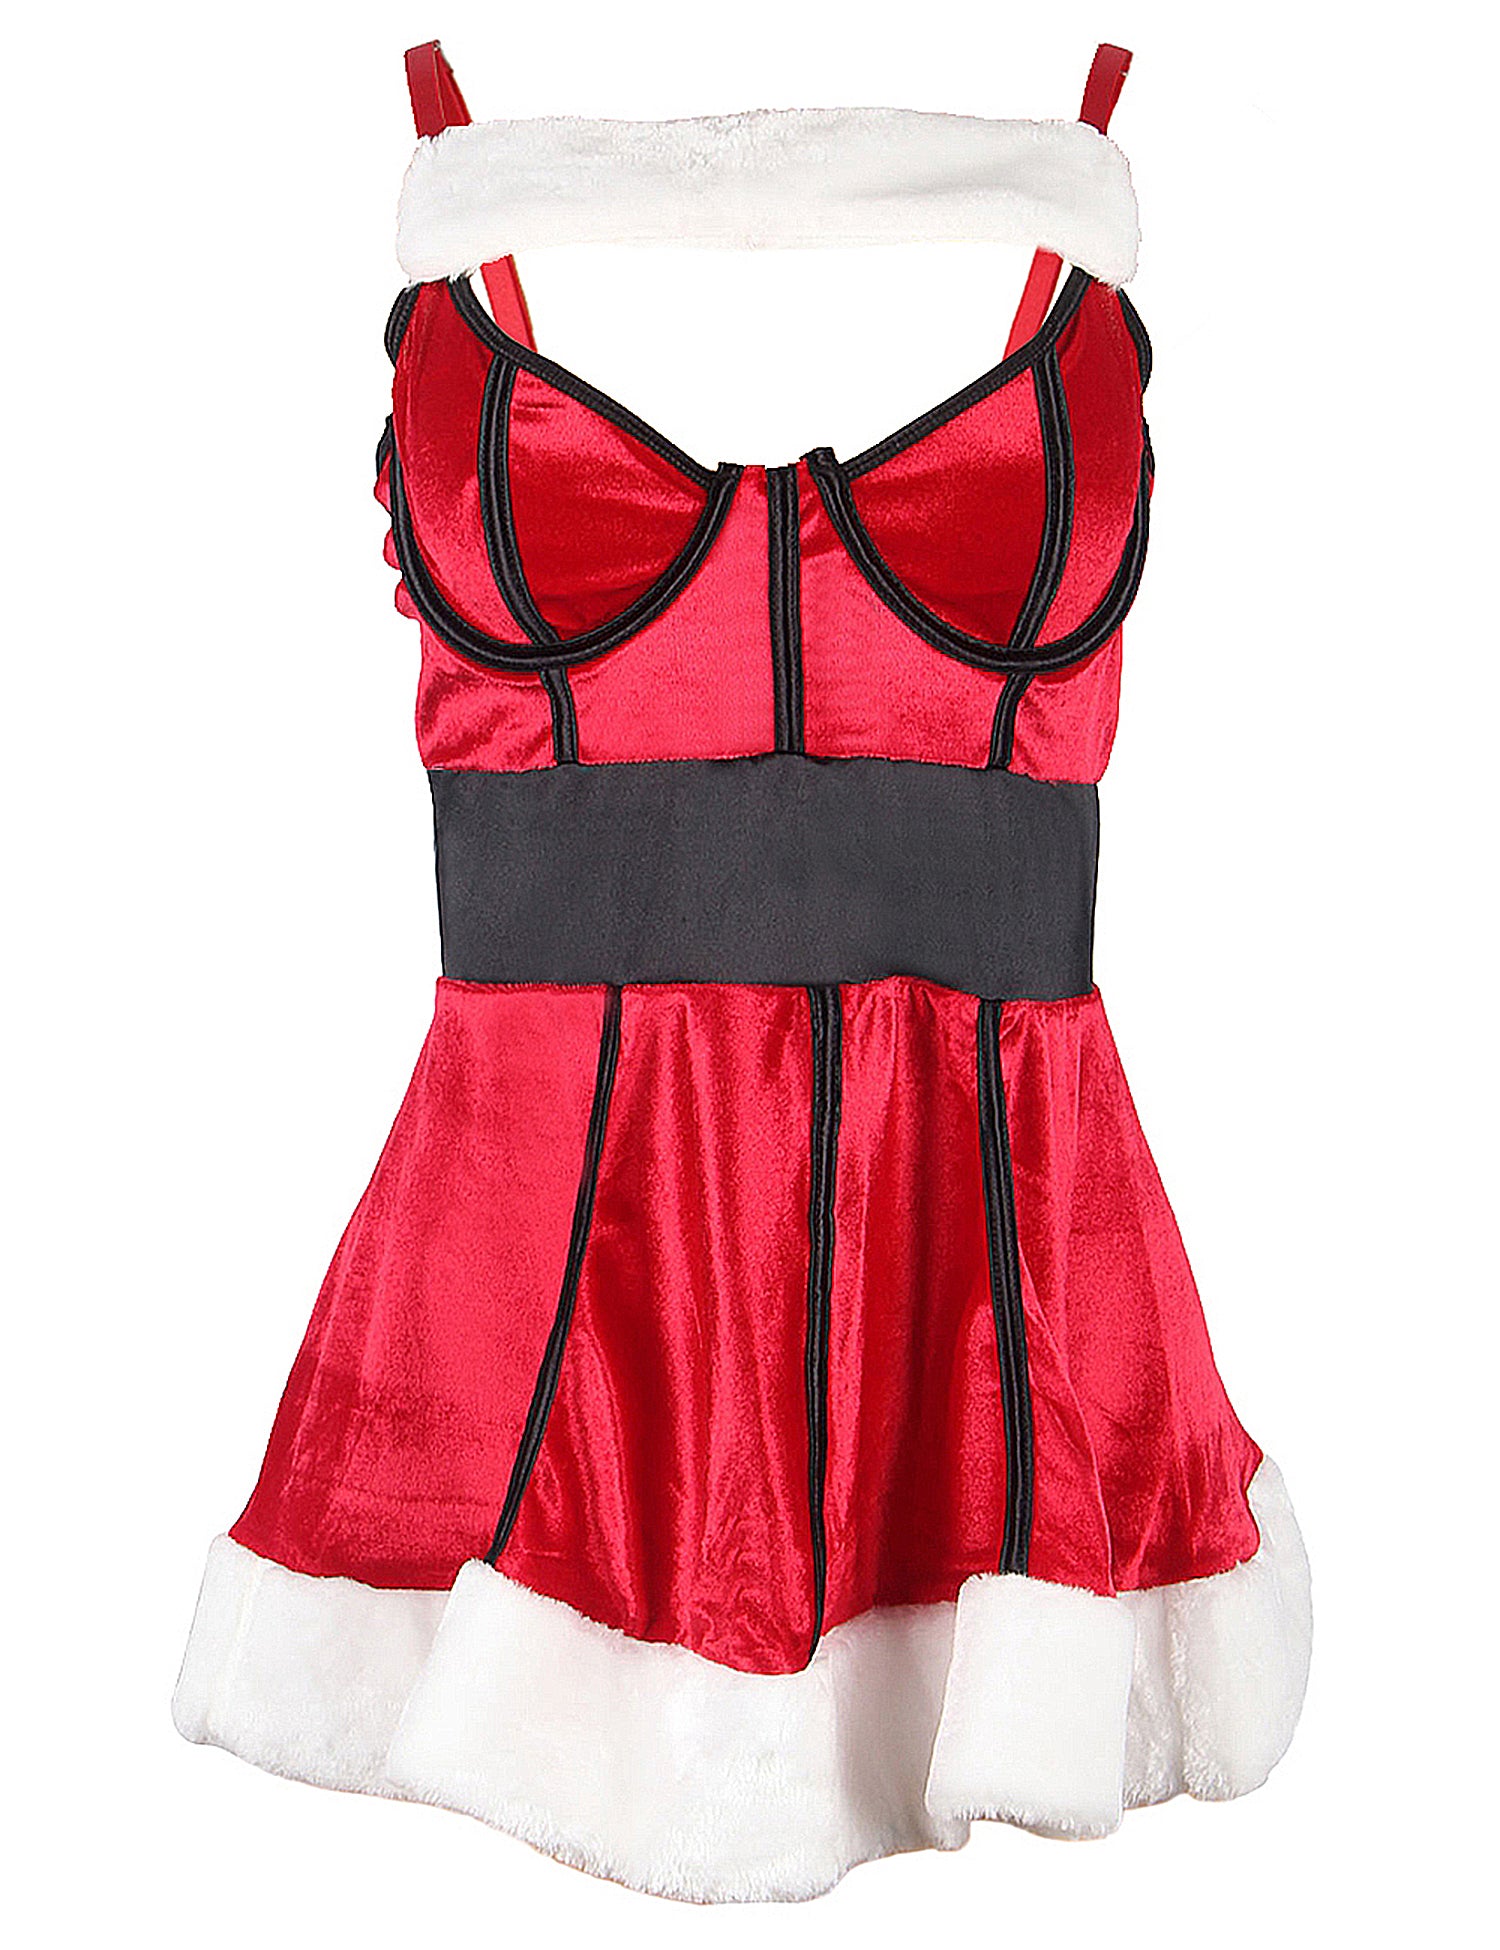 Sexy Women High Quality Plus Size Christmas Lingerie Sets